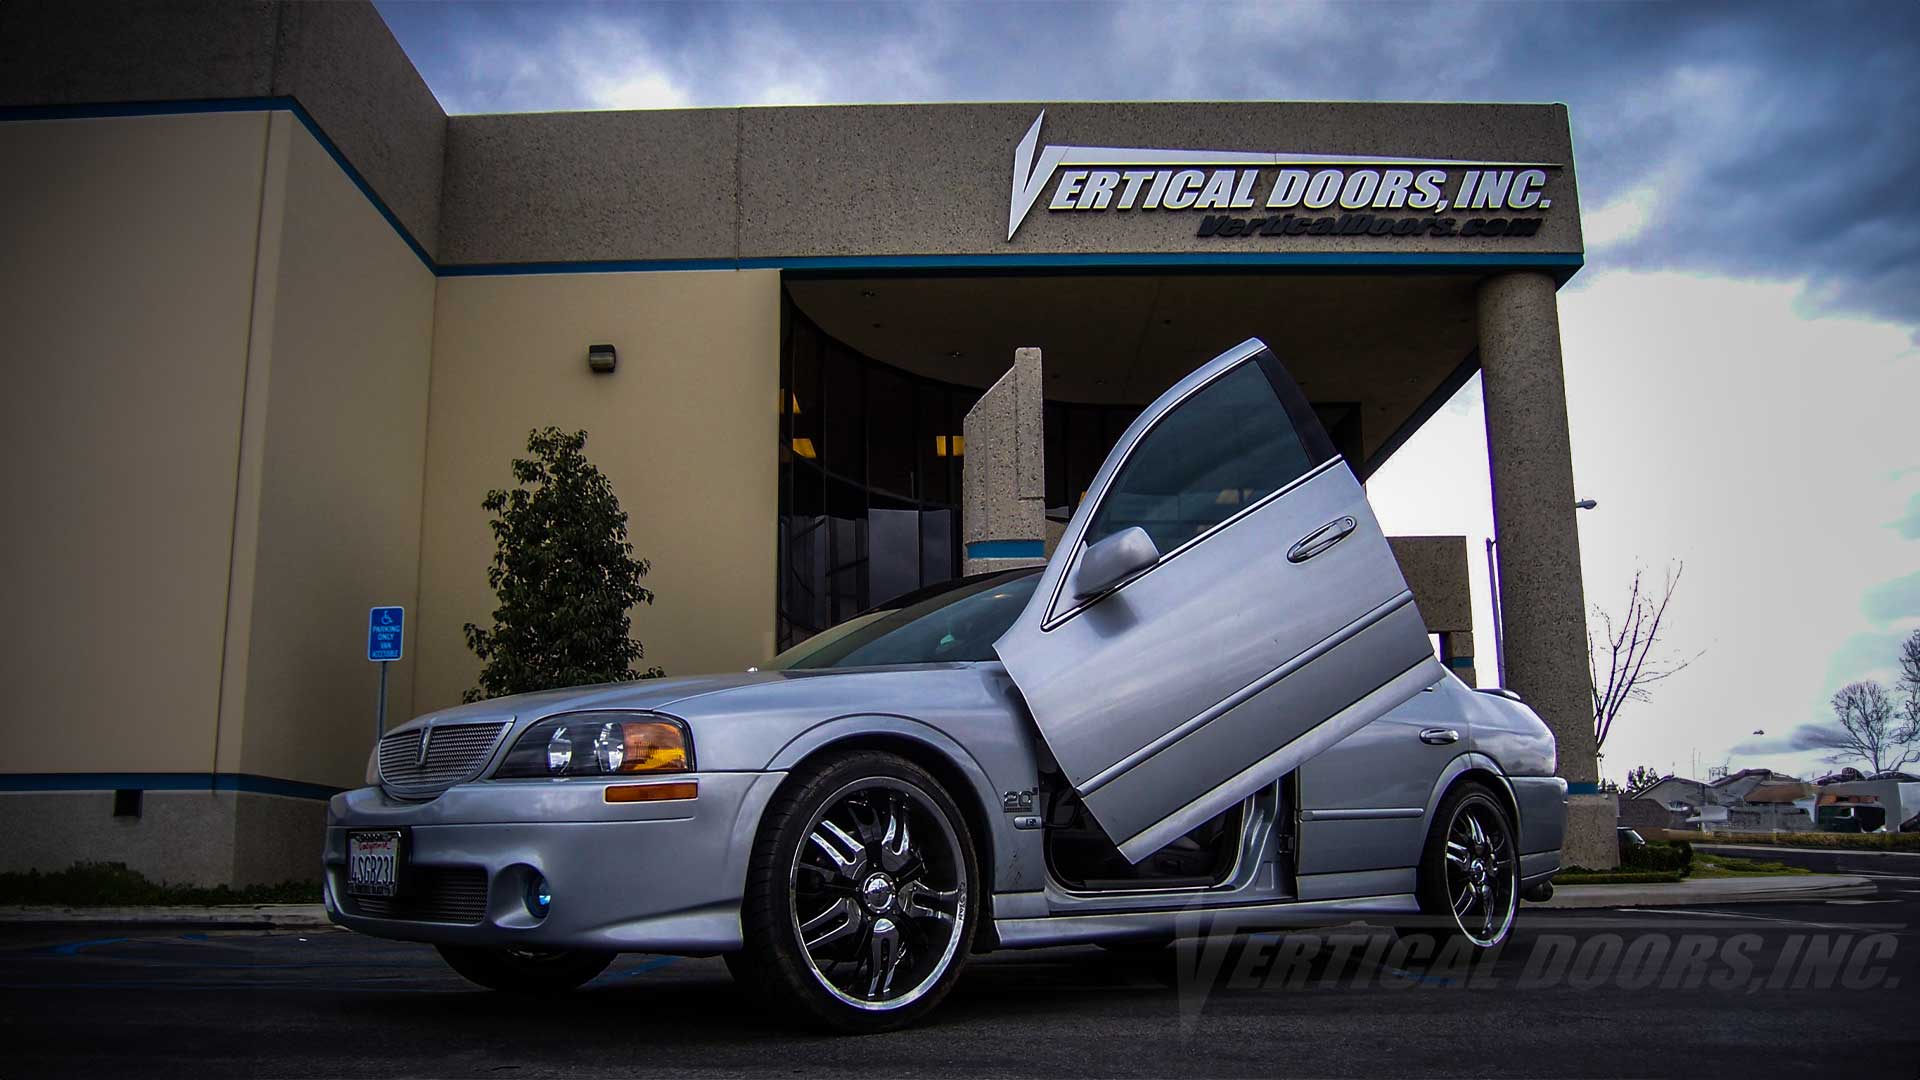 Vertical doors kit compatible Lincoln LS 2000-2006 special order kit